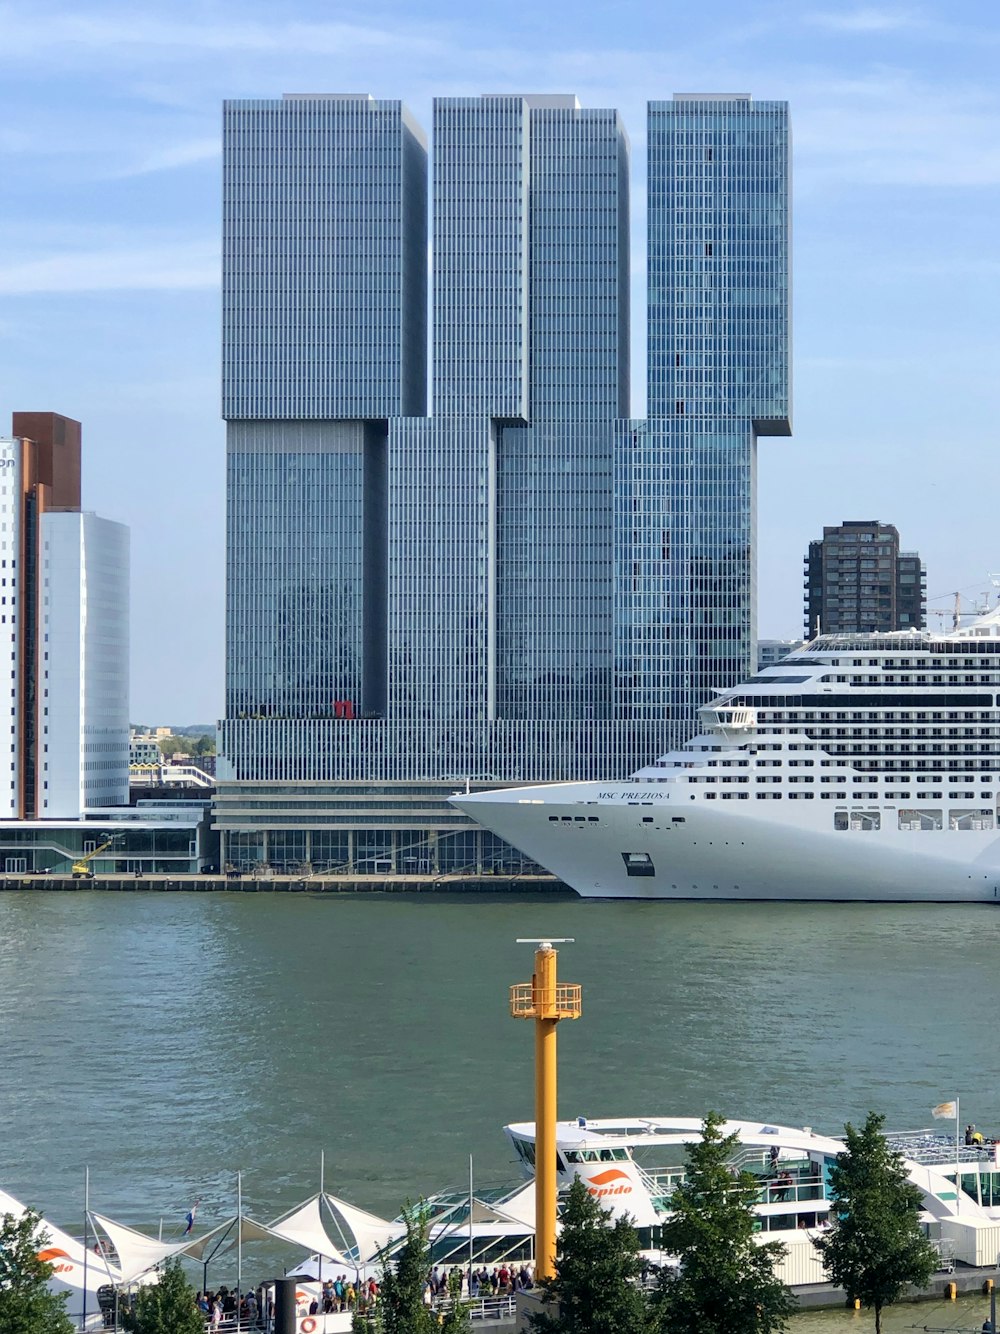 white cruise ship on water near city buildings during daytime